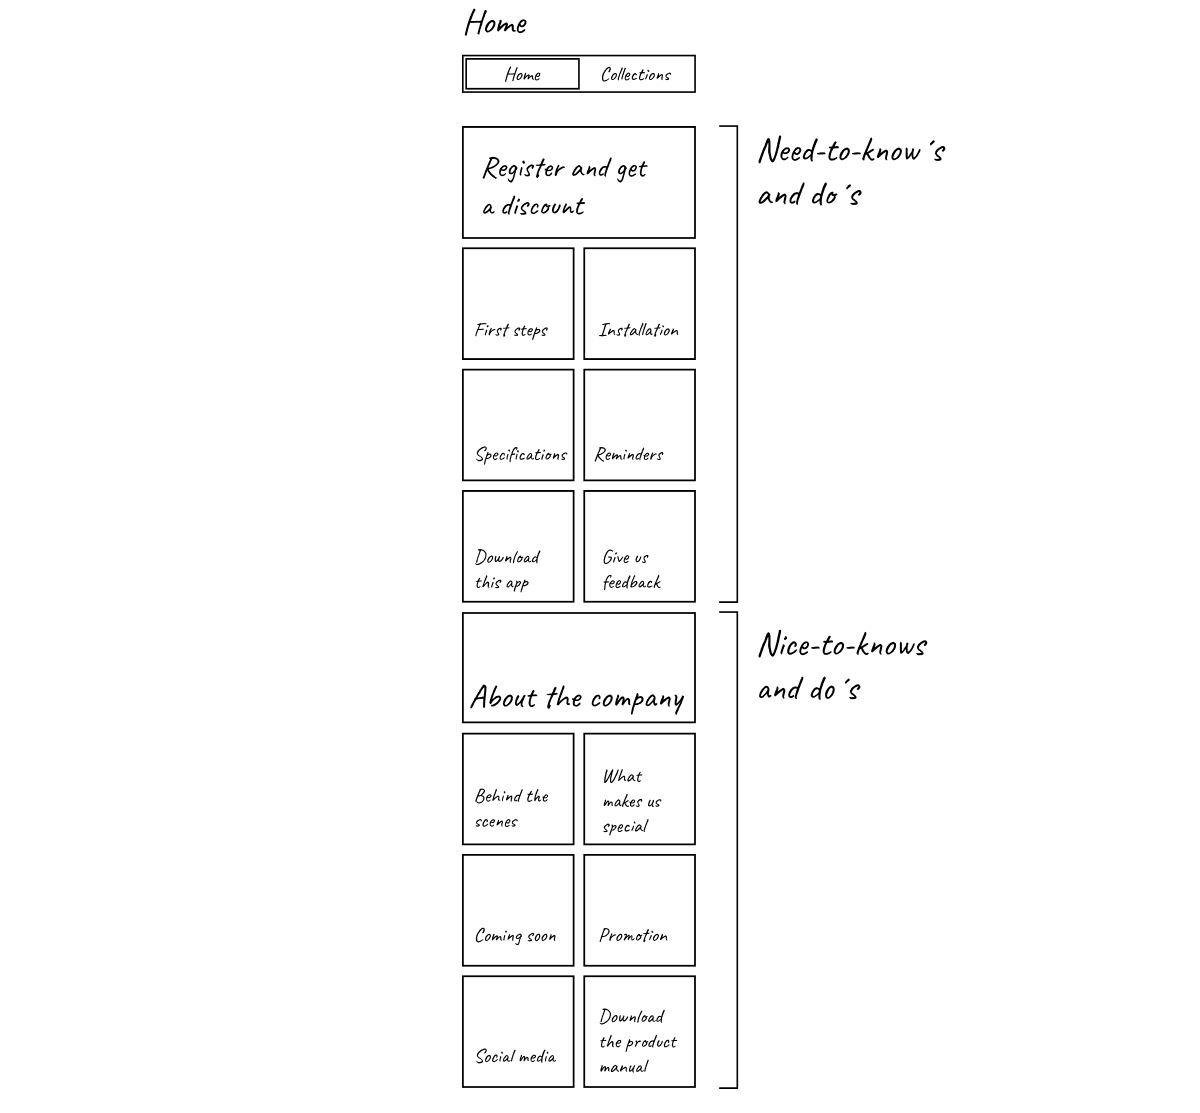 Home wireframe